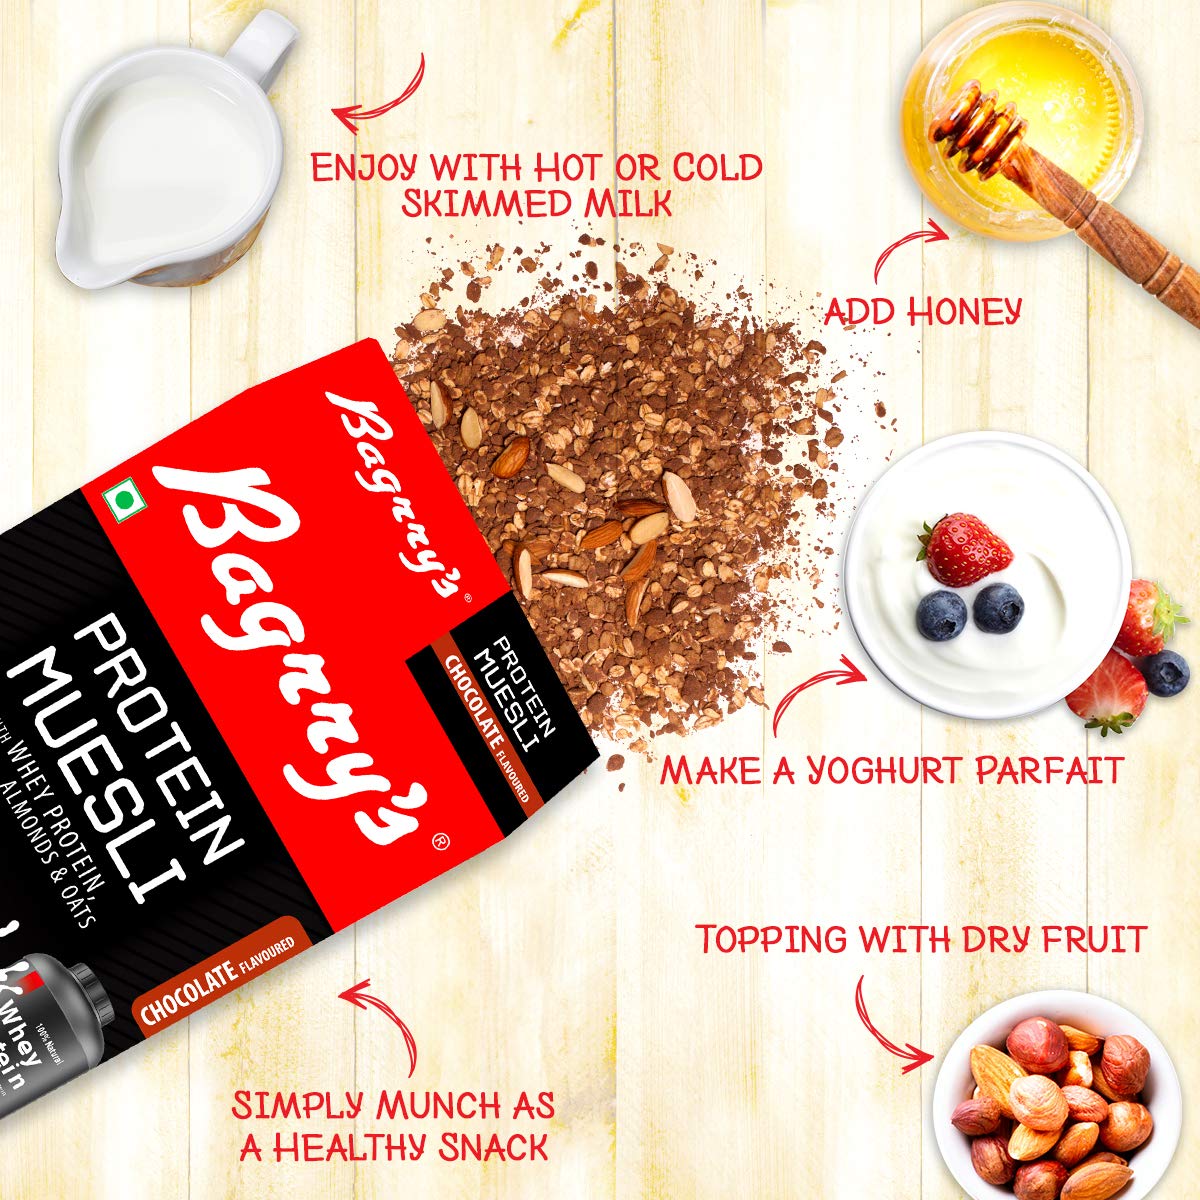 Bagrry's Protein Muesli with Whey Protein, Almonds and Oats